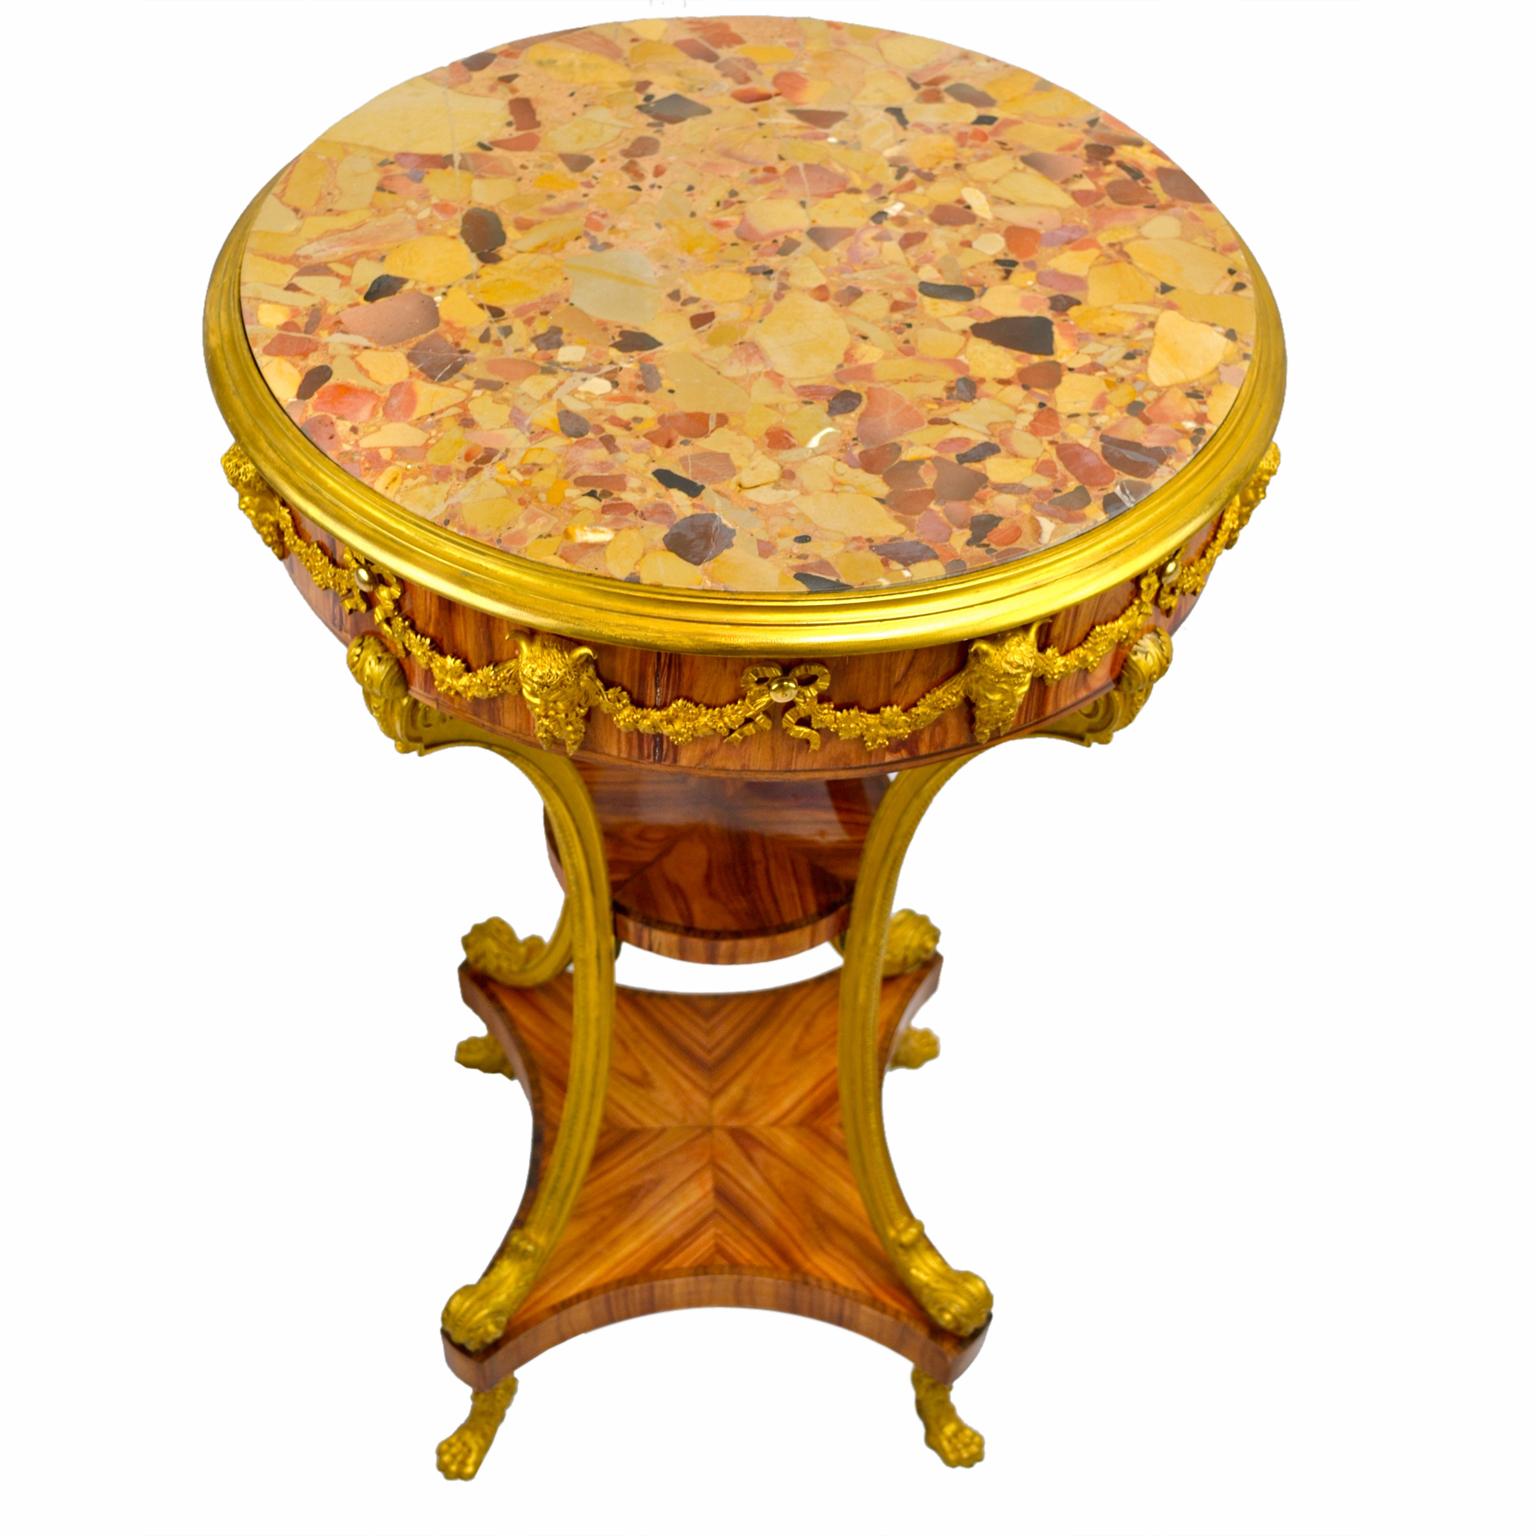 A highly decorative round occasional/centre table in the Louis XVI style; the Breche d’Alp marble top has a gilt bronze border above a skirt of Tulipwood decorated in the round with gilt satyr’s masks and swags; four inward swept gilt legs connect